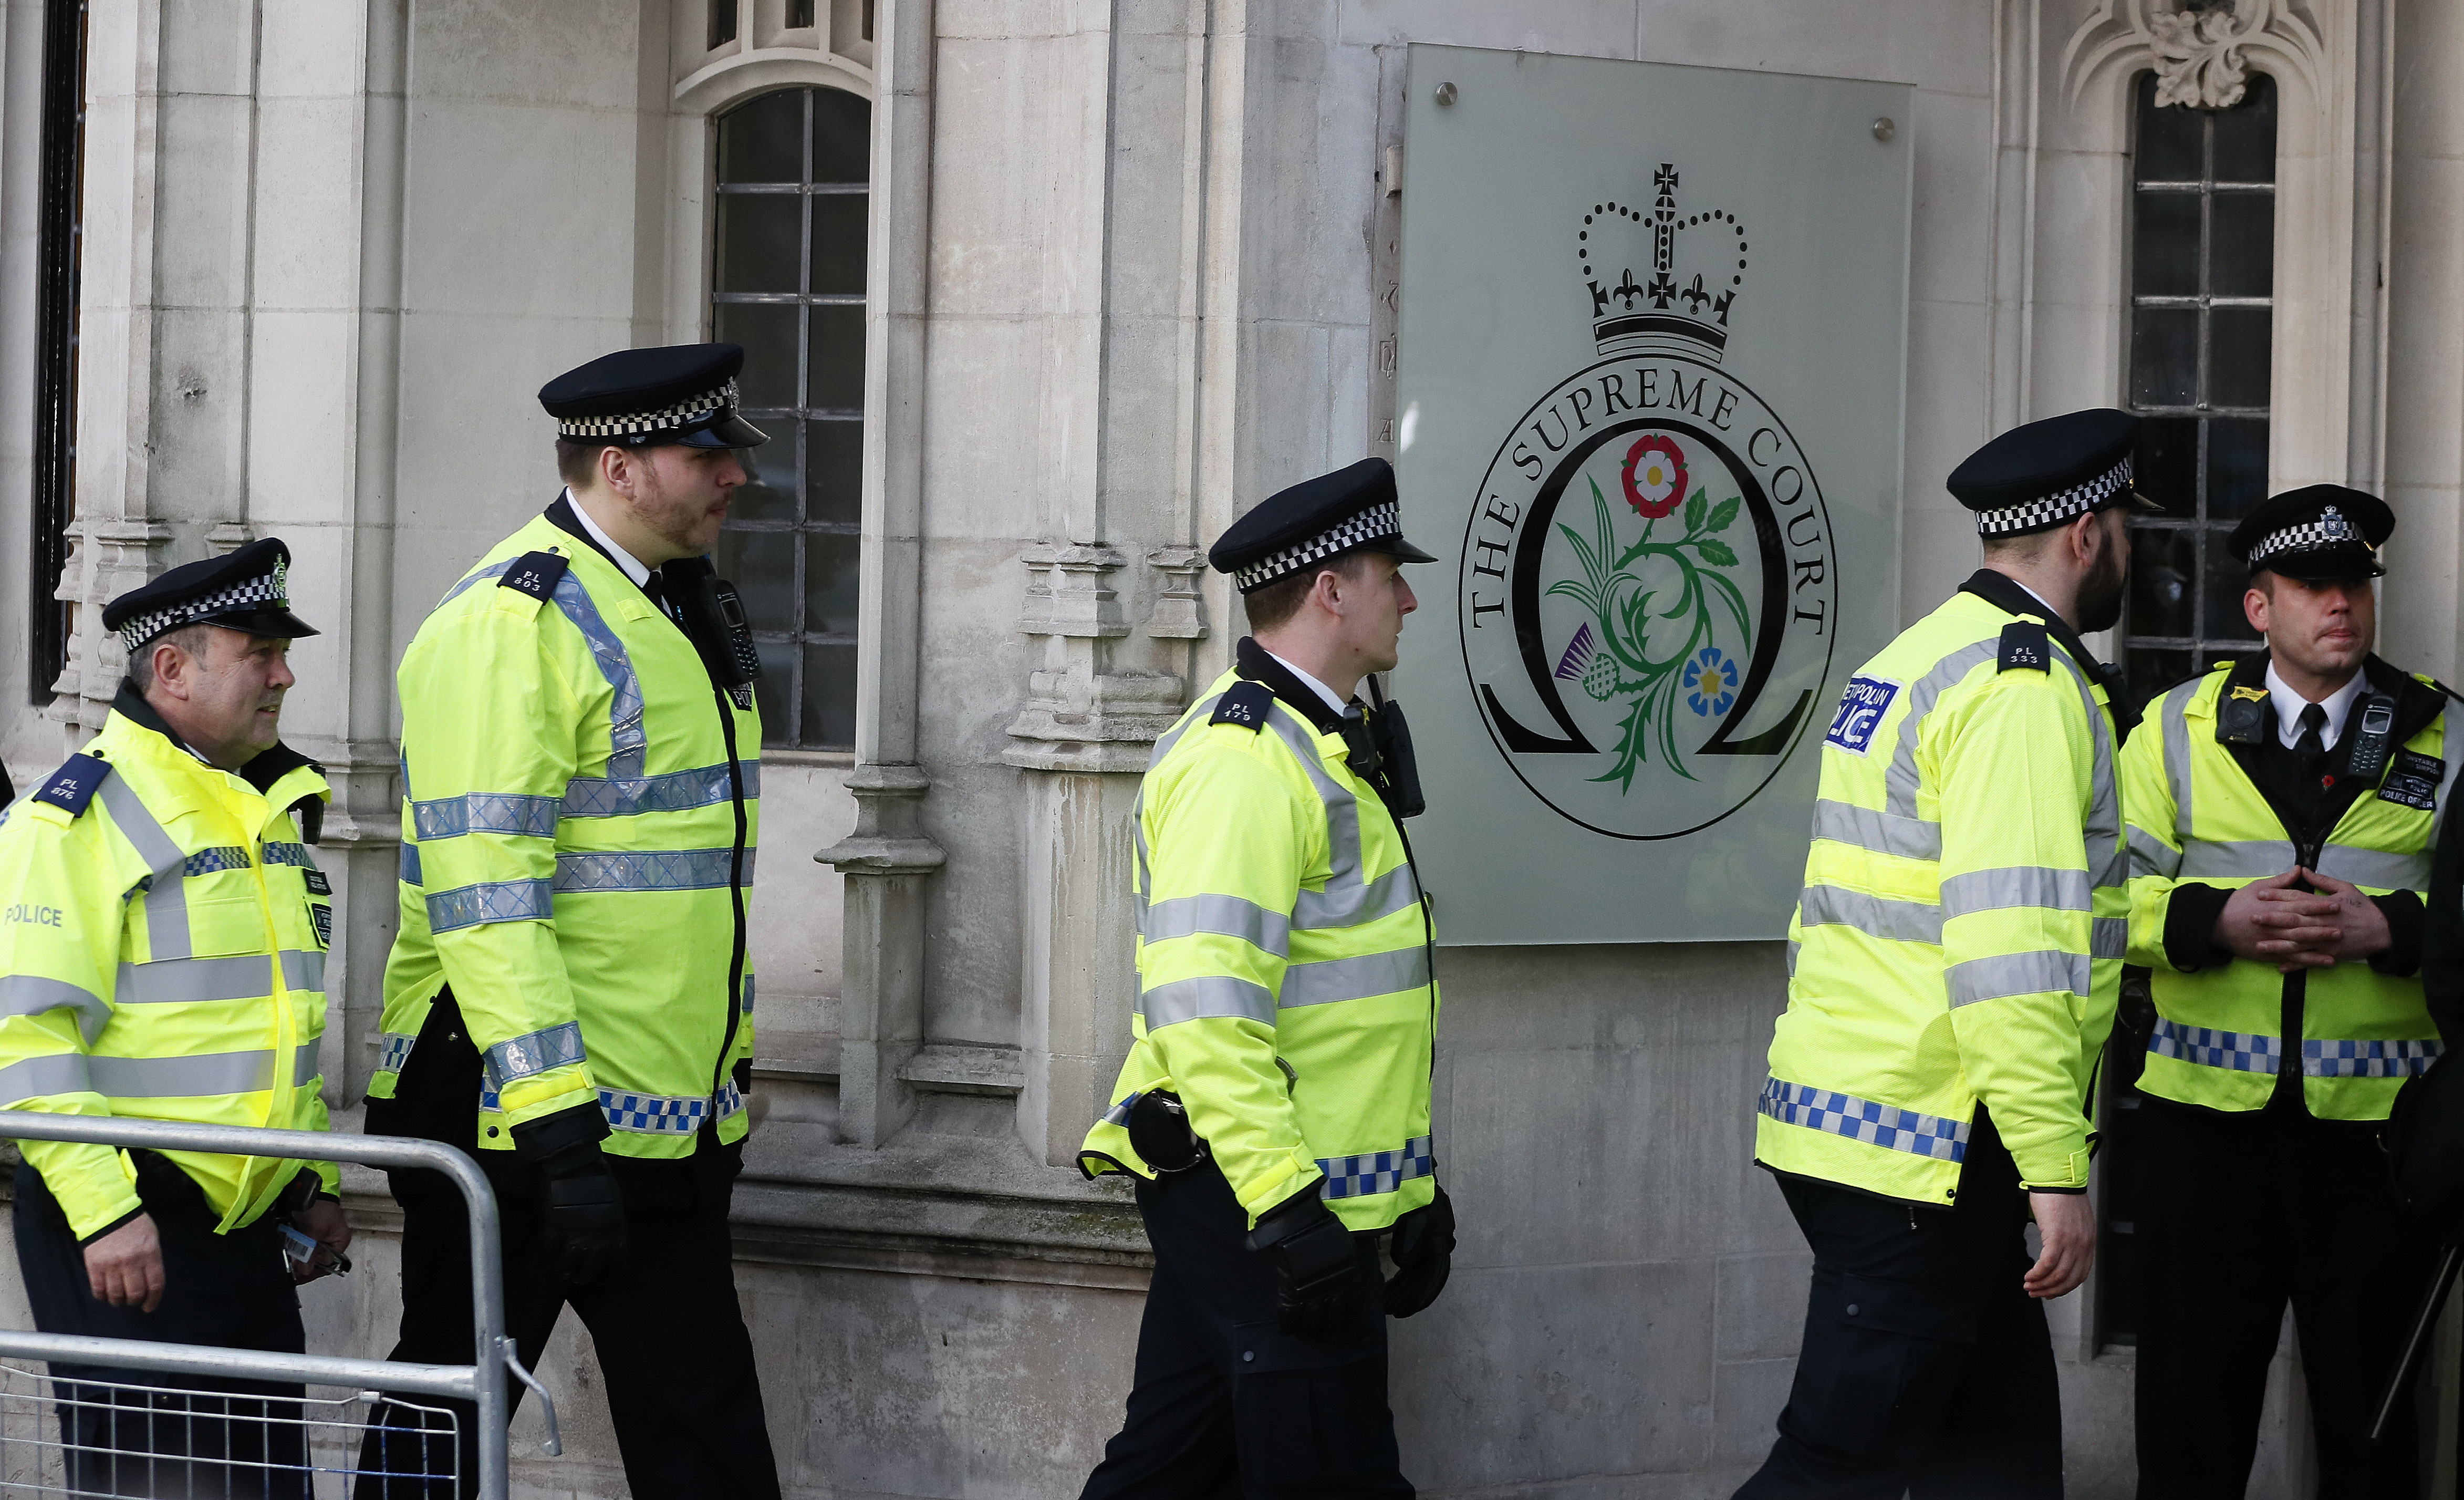 Police officers arrive at the Supreme Court in London, Tuesday, Jan. 24, 2017. Britain's Supreme Court will rule Tuesday on whether the prime minister or Parliament has the right to trigger the process of taking Britain out of the European Union. (AP Photo/Kirsty Wigglesworth)